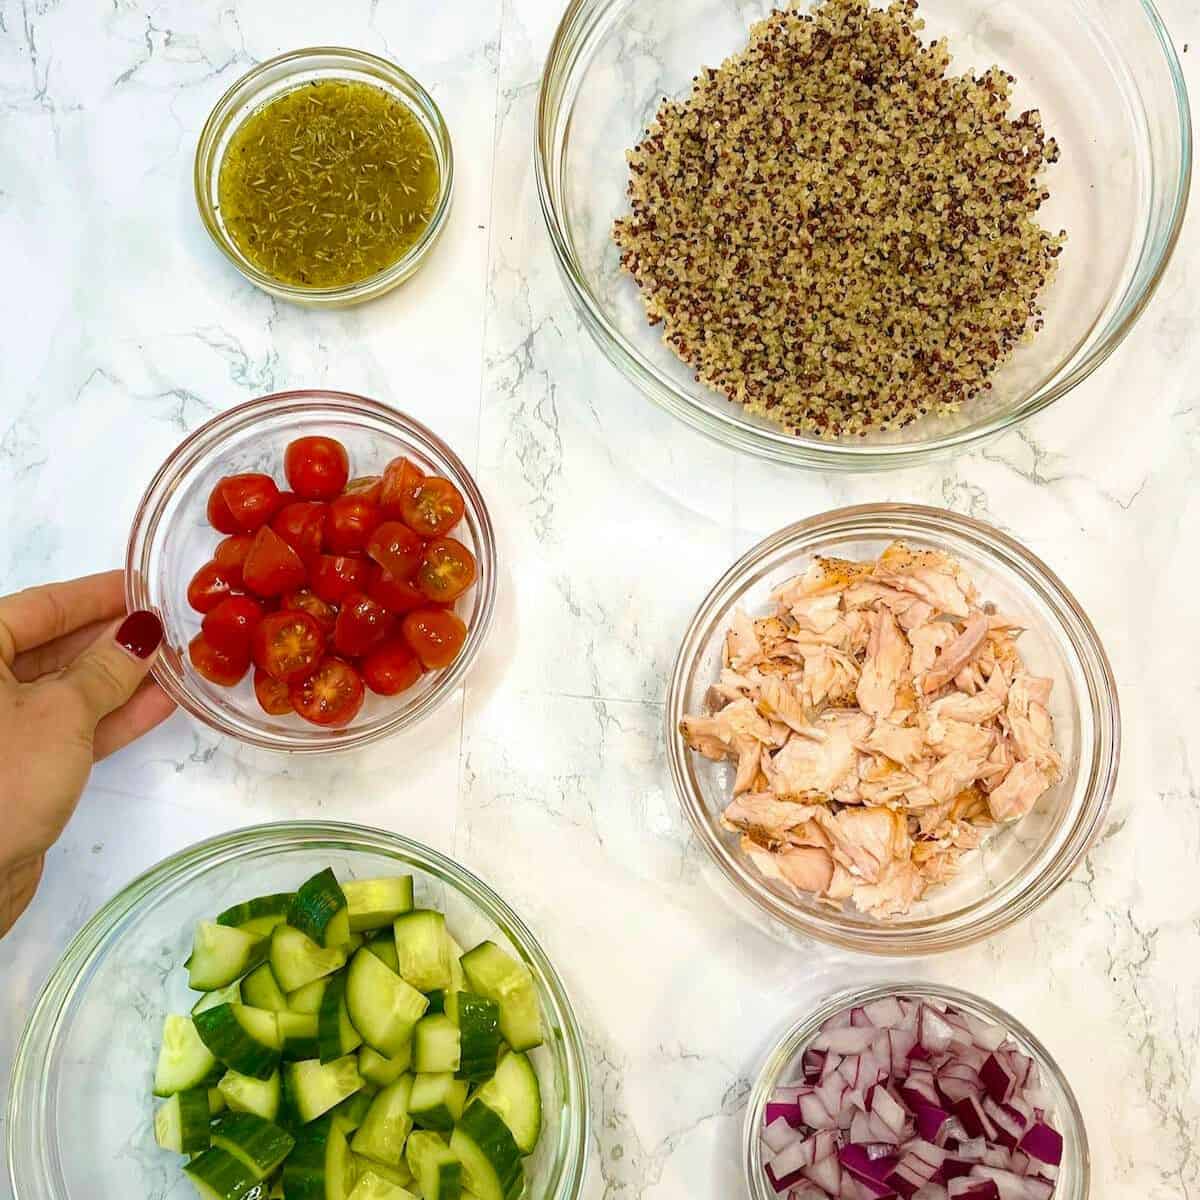 the ingredients for salmon and quinoa salad on a white table including a bowl of salmon, quinoa, cucumber, tomatoes, red onions, and an herb dressing